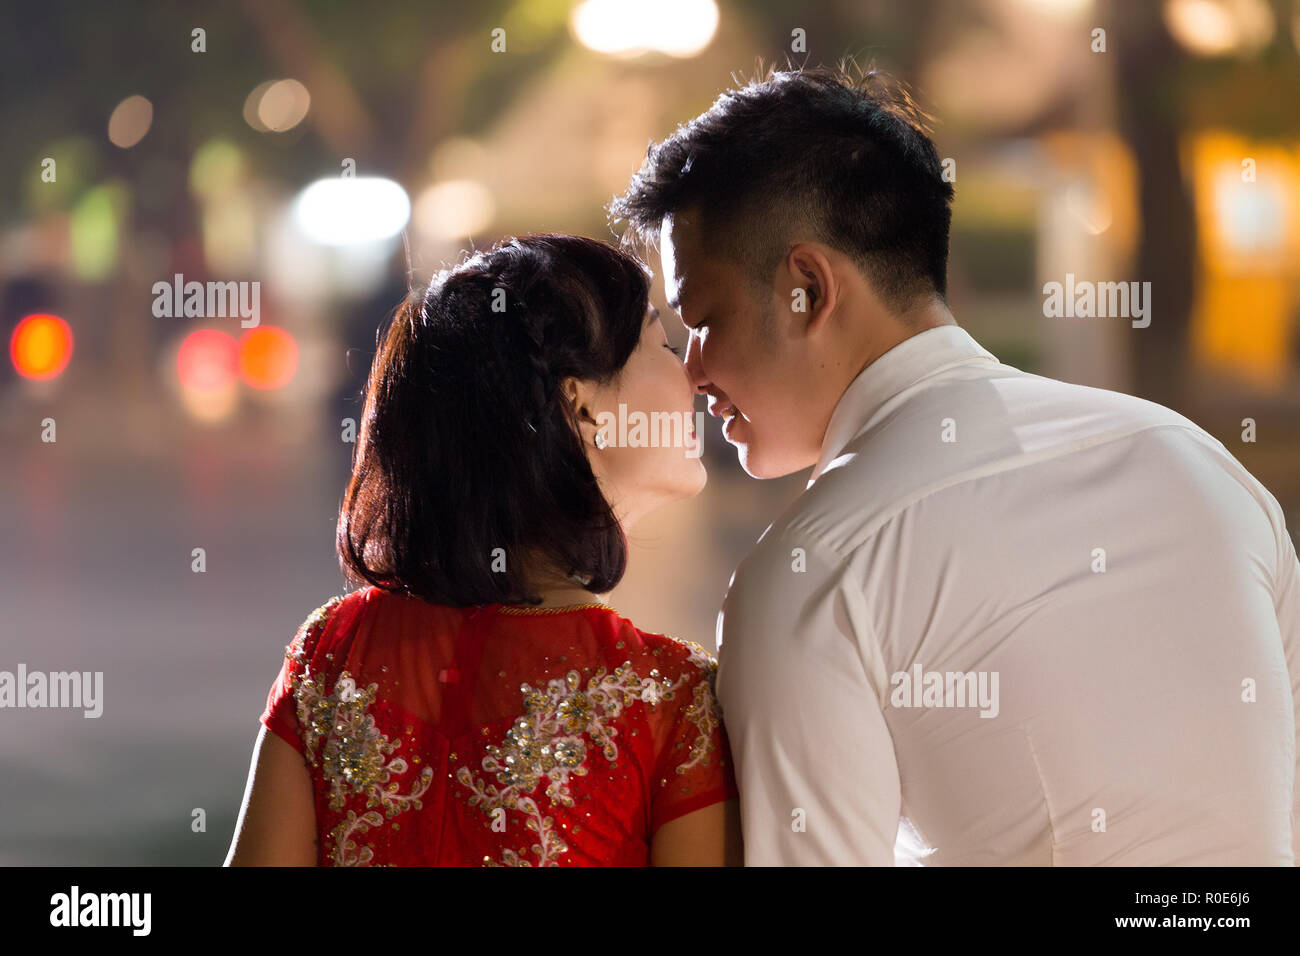 HANOI, VIETNAM, DECEMBER 15, 2014: Two young married people are exchanging a love kiss in evening at the city center's Hoan Kiem lake in Hanoi city, V Stock Photo